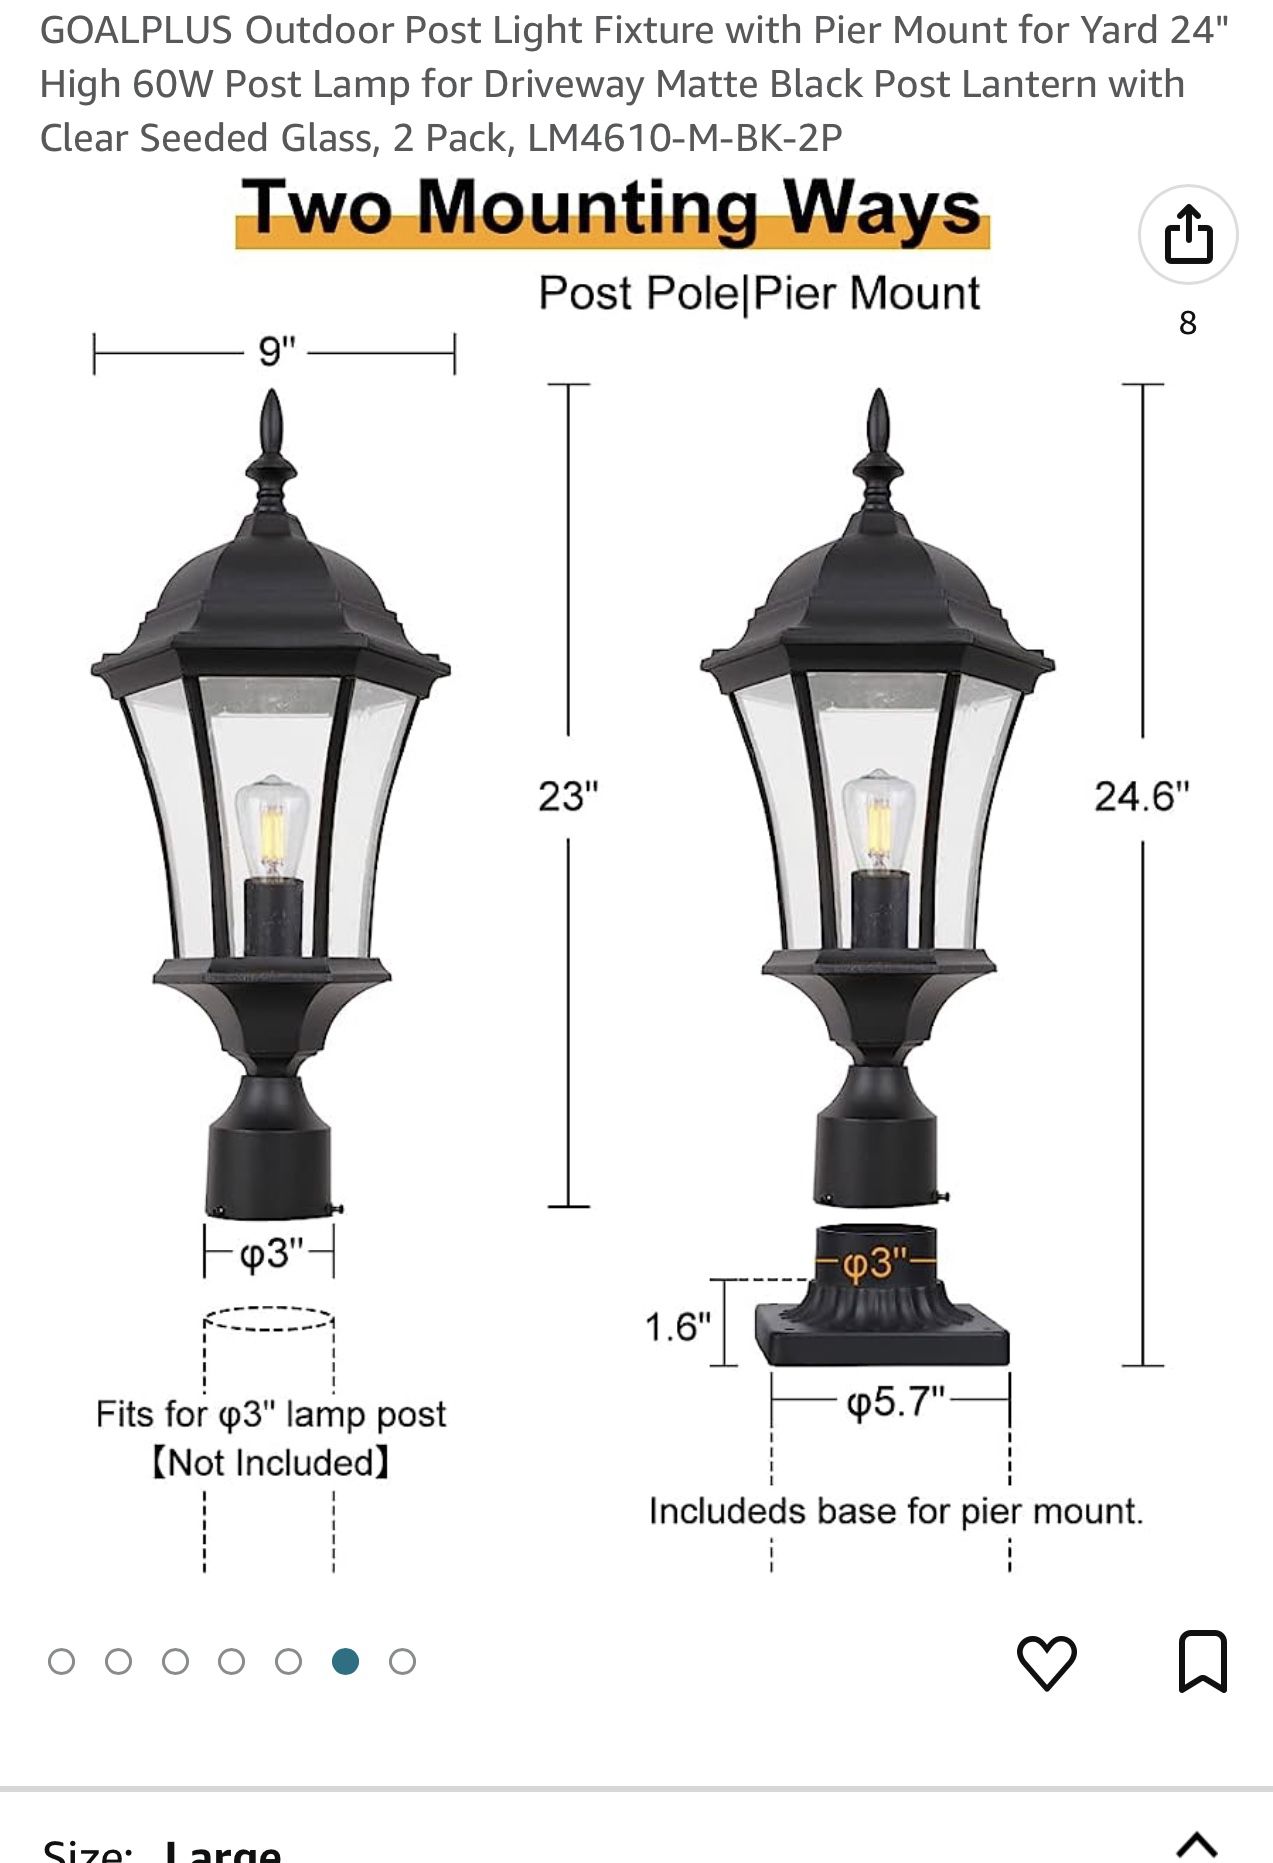 GOALPLUS Outdoor Post Light Fixture with Pier Mount for Yard 24" High 60W Post Lamp for Driveway Matte Black Post Lantern with Clear Seeded Glass, P - 5